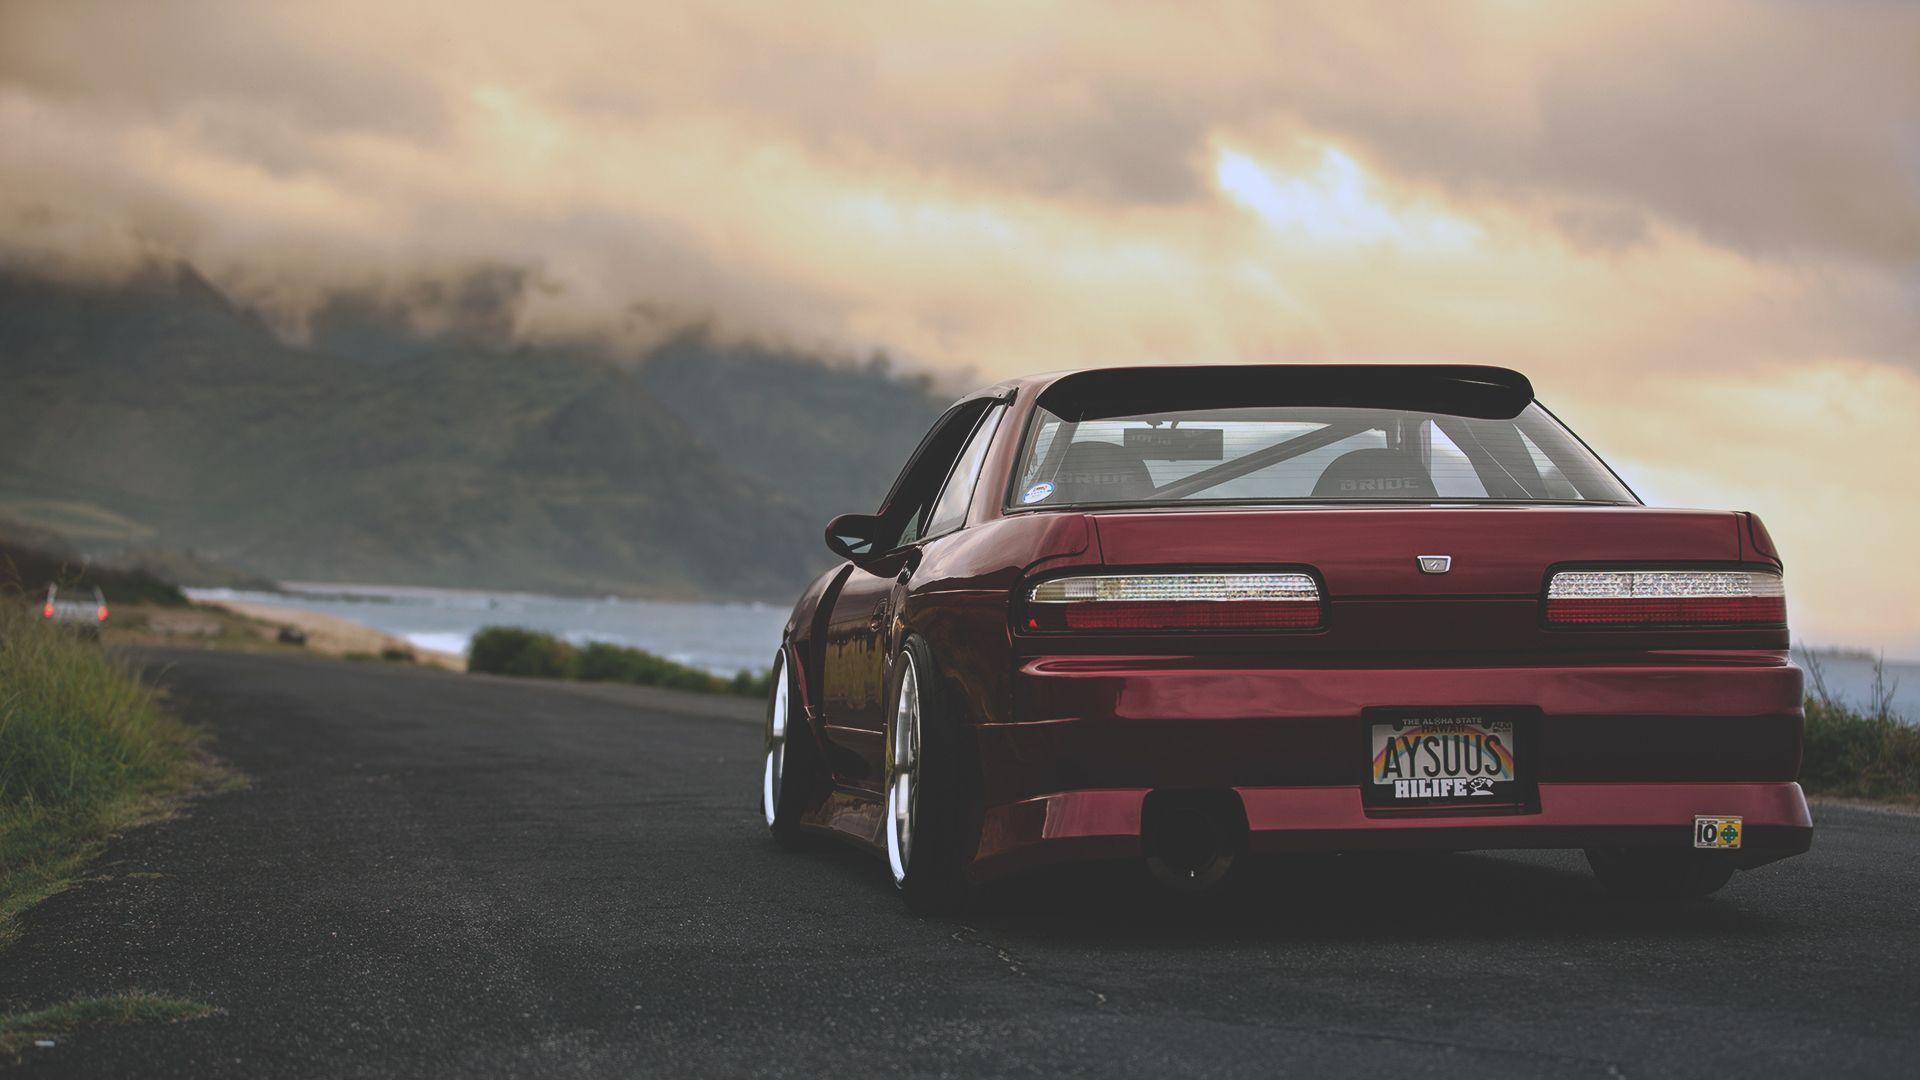 nissan silvia, hd car wallpapers and backgrounds